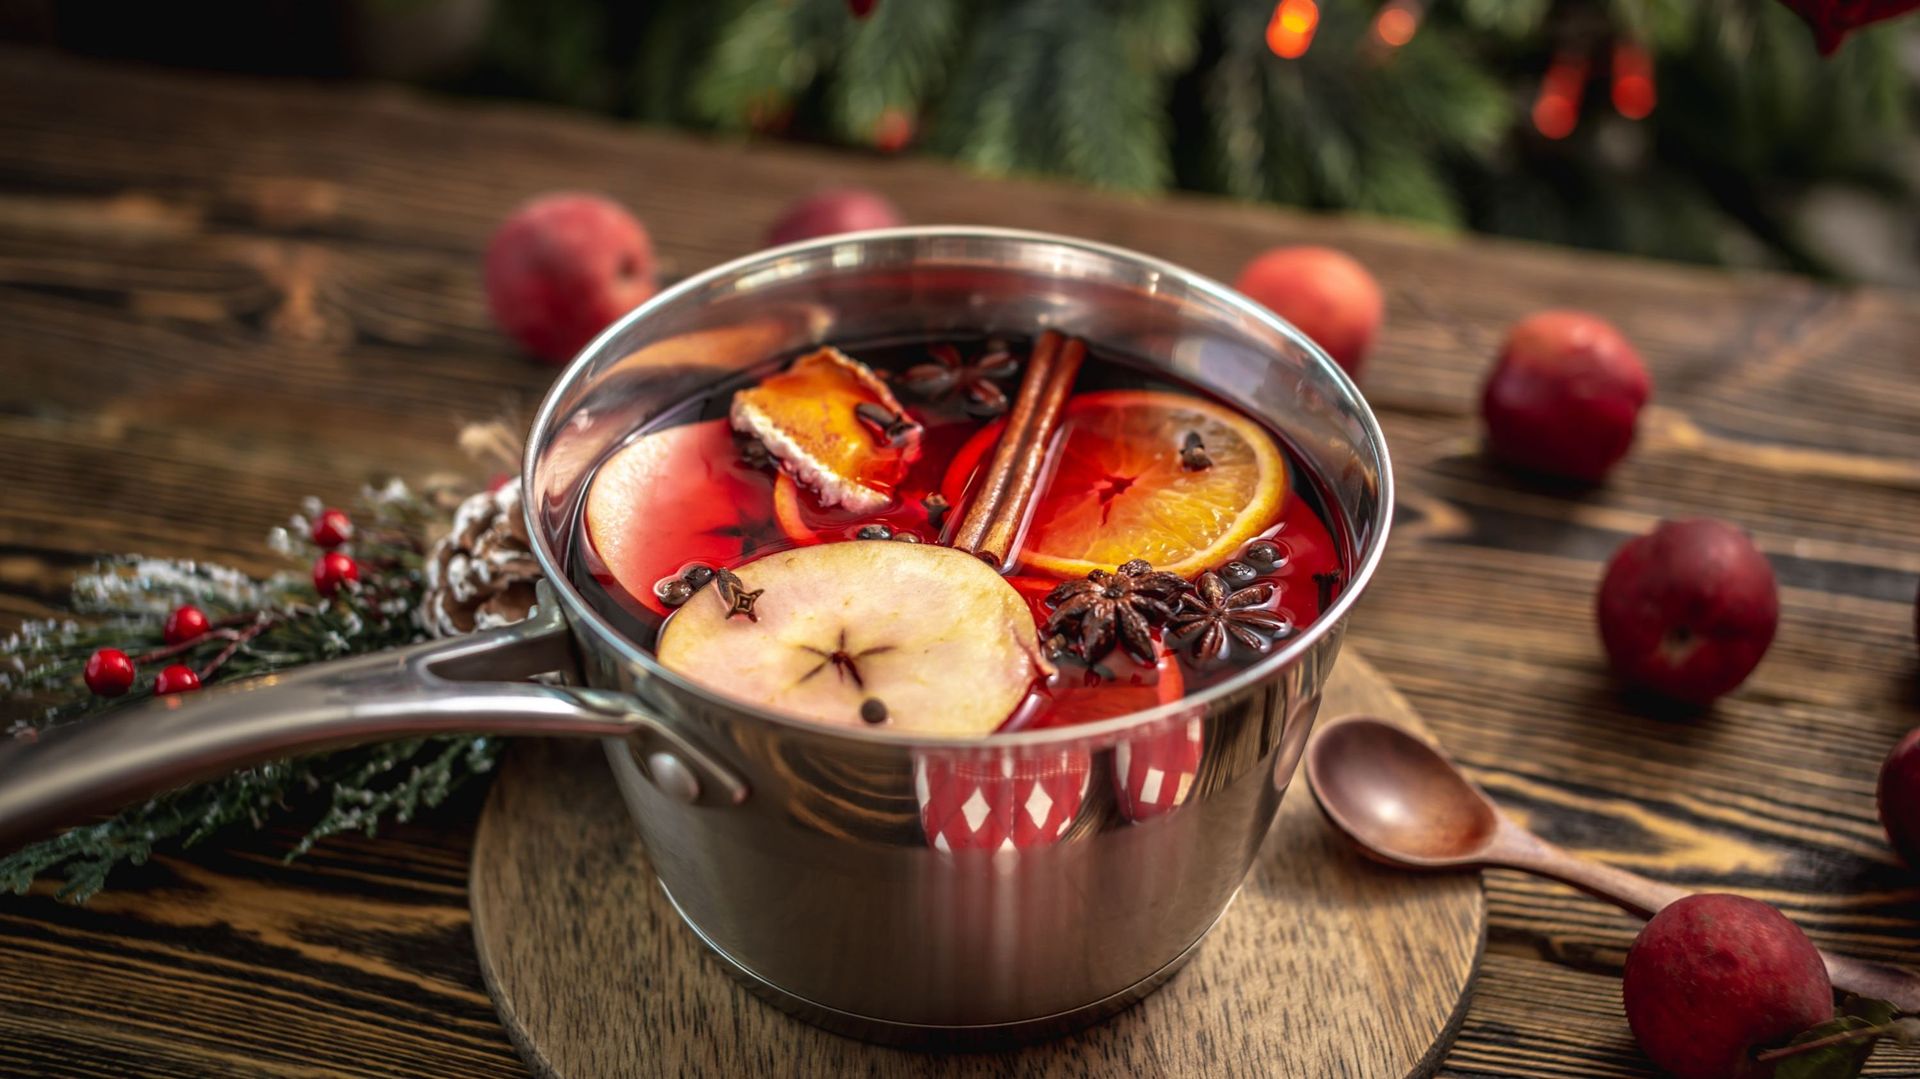 Pot with spicy hot mulled wine on a wooden table with fruit and a Christmas tree in the background. Concept of a cozy festive atmosphere, New Year mood